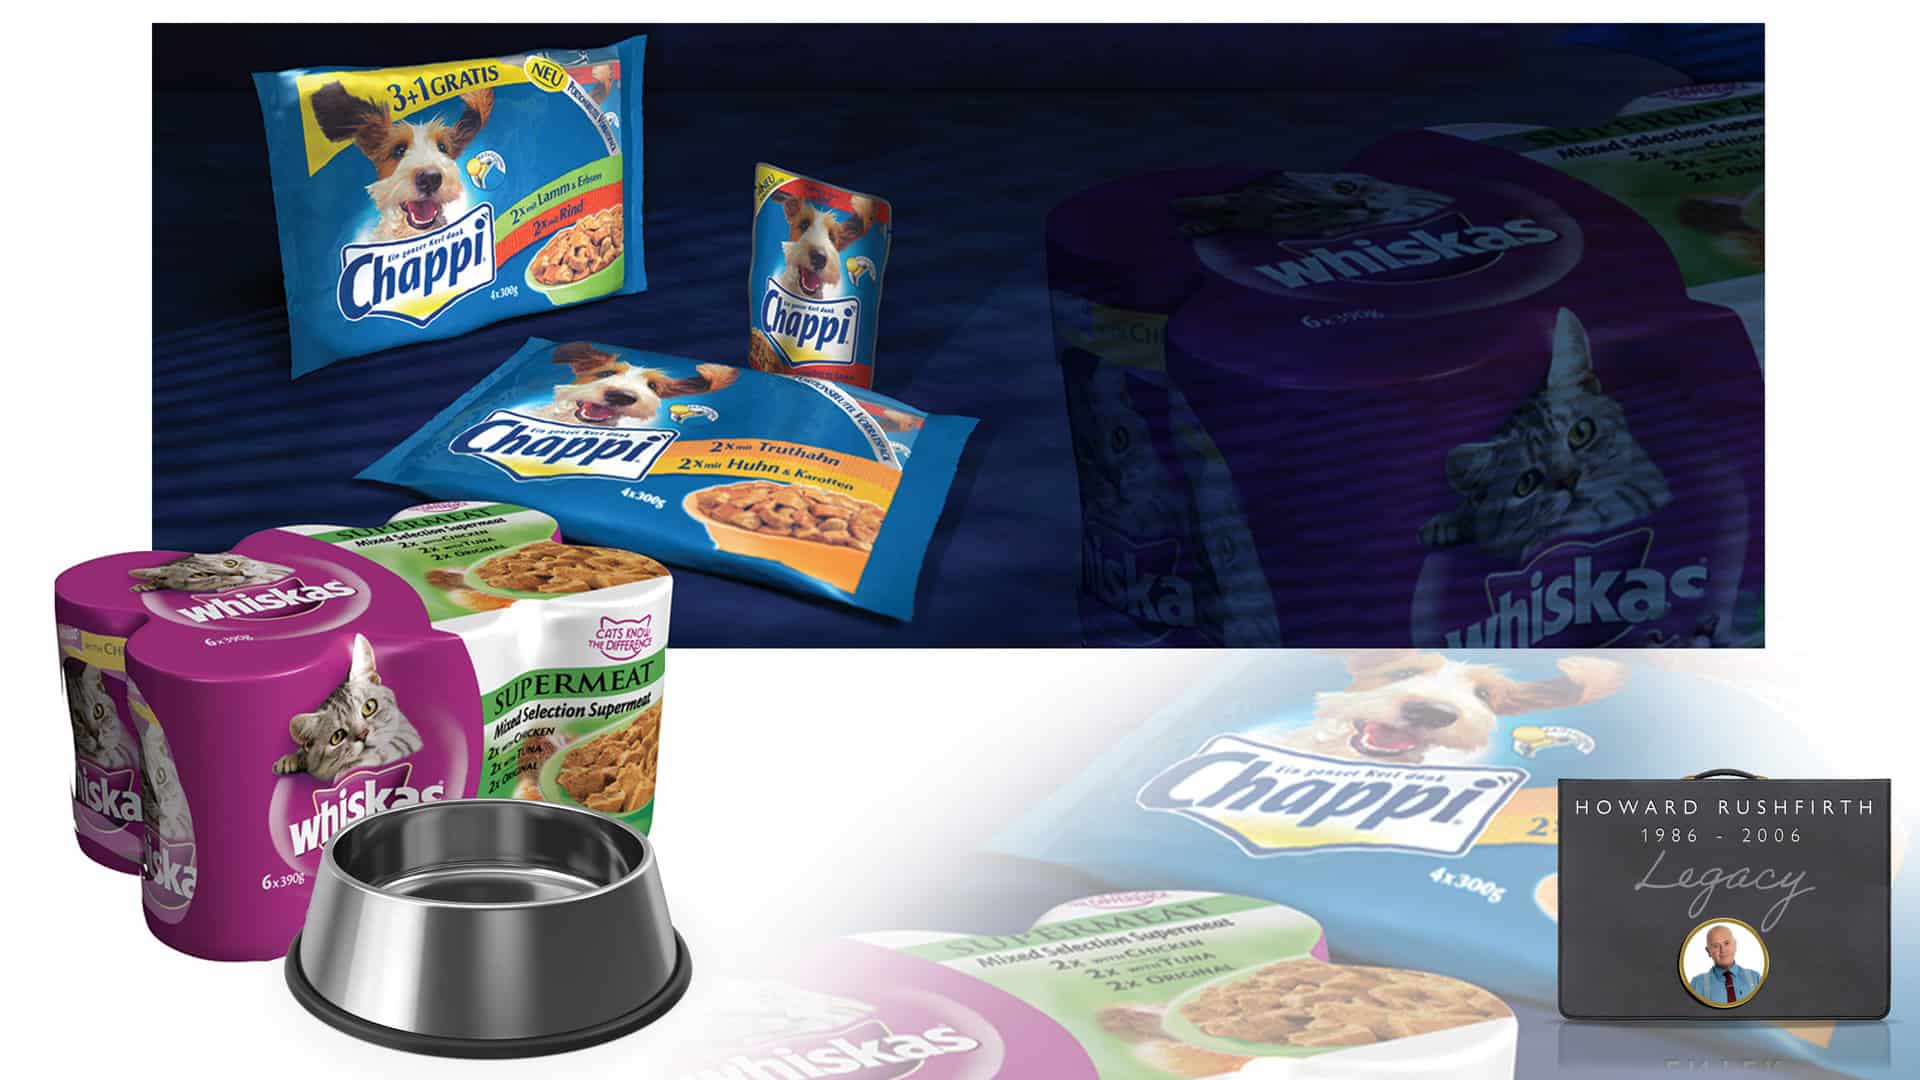 Case Study image for Chappi packaging